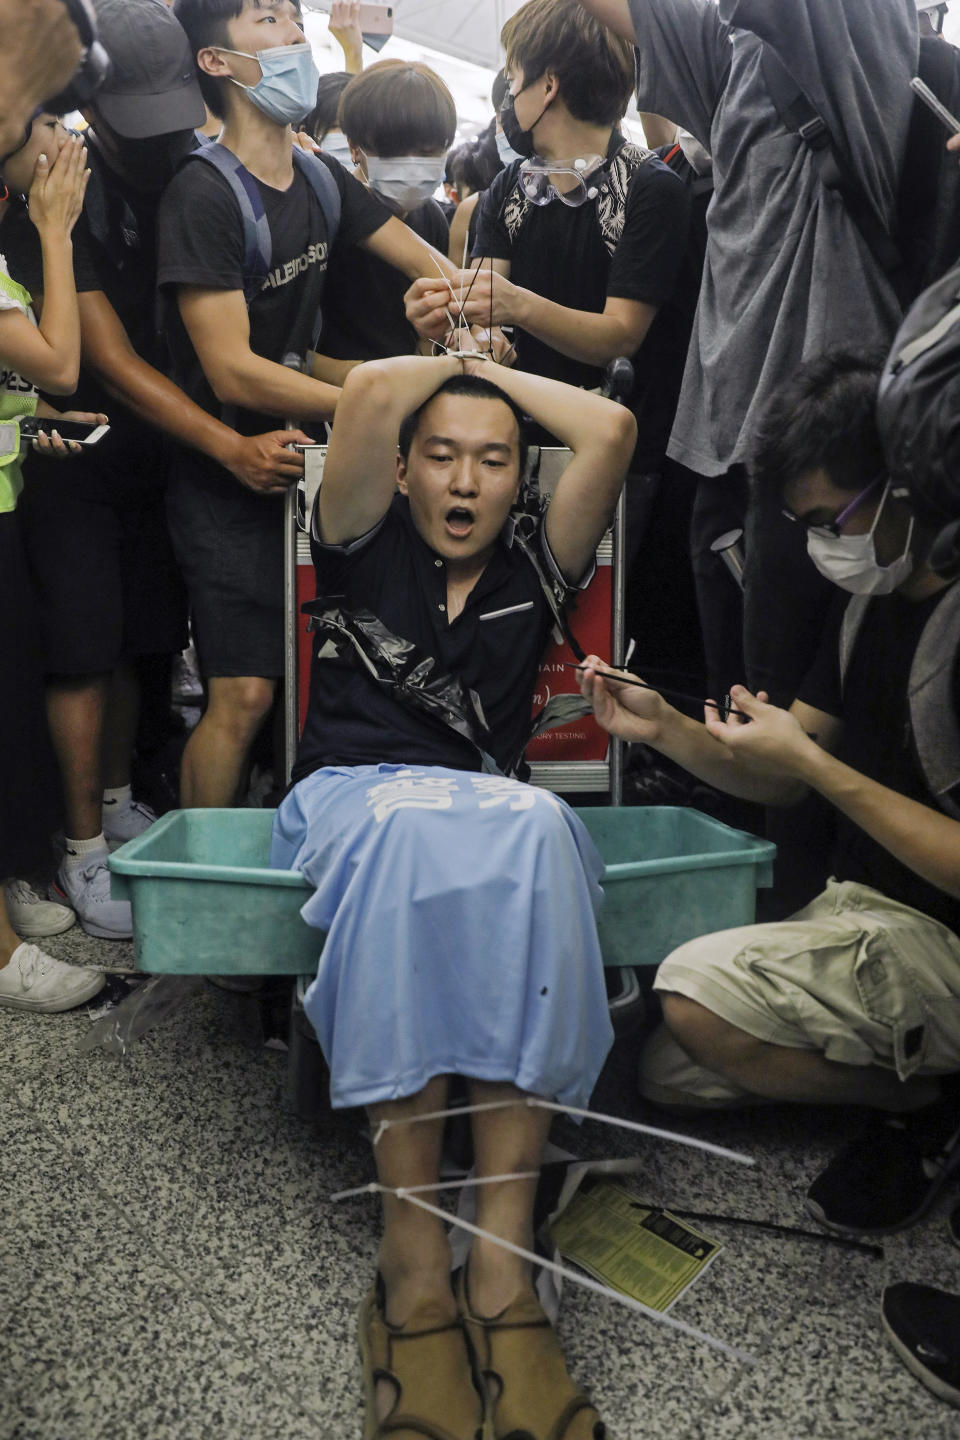 Protesters restrain a man on a luggage trolley, who protesters claimed was a Chinese undercover agent during a demonstration at the Airport in Hong Kong, Tuesday, Aug. 13, 2019. Riot police clashed with pro-democracy protesters at Hong Kong's airport late Tuesday night, a chaotic end to a second day of demonstrations that caused mass flight cancellations at the Chinese city's busy transport hub. (AP Photo/Vincent Yu)